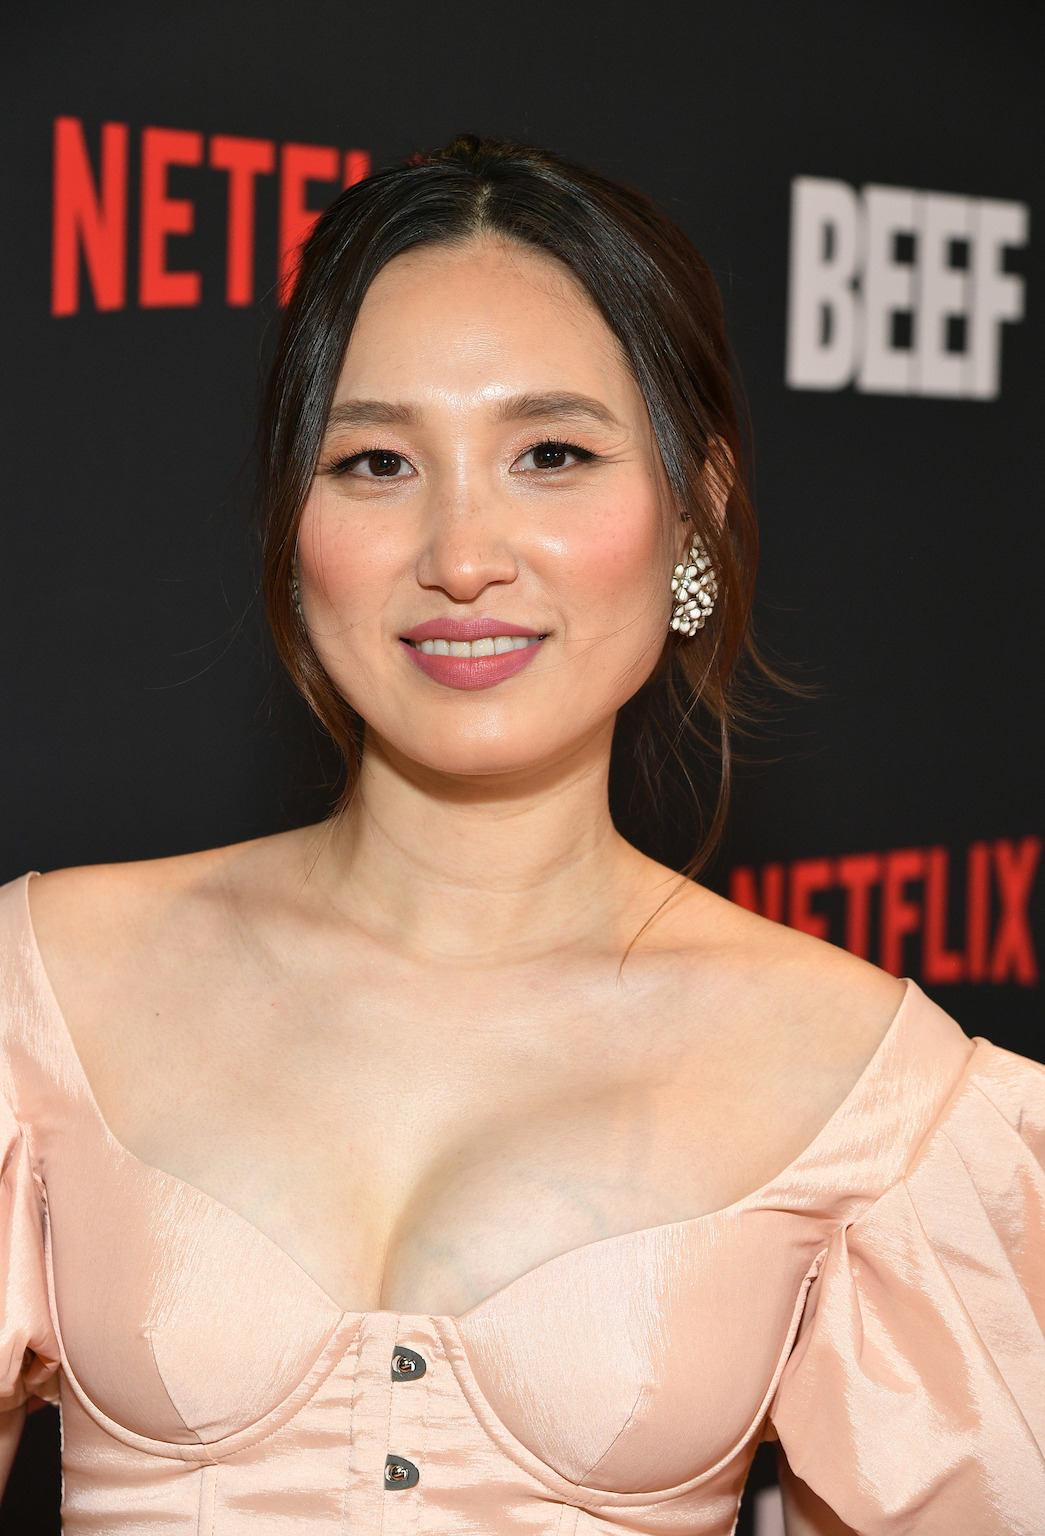 Alyssa Kim at the Los Angeles Premiere of Netflix's "BEEF" on March 30, 2023 in Hollywood, California.